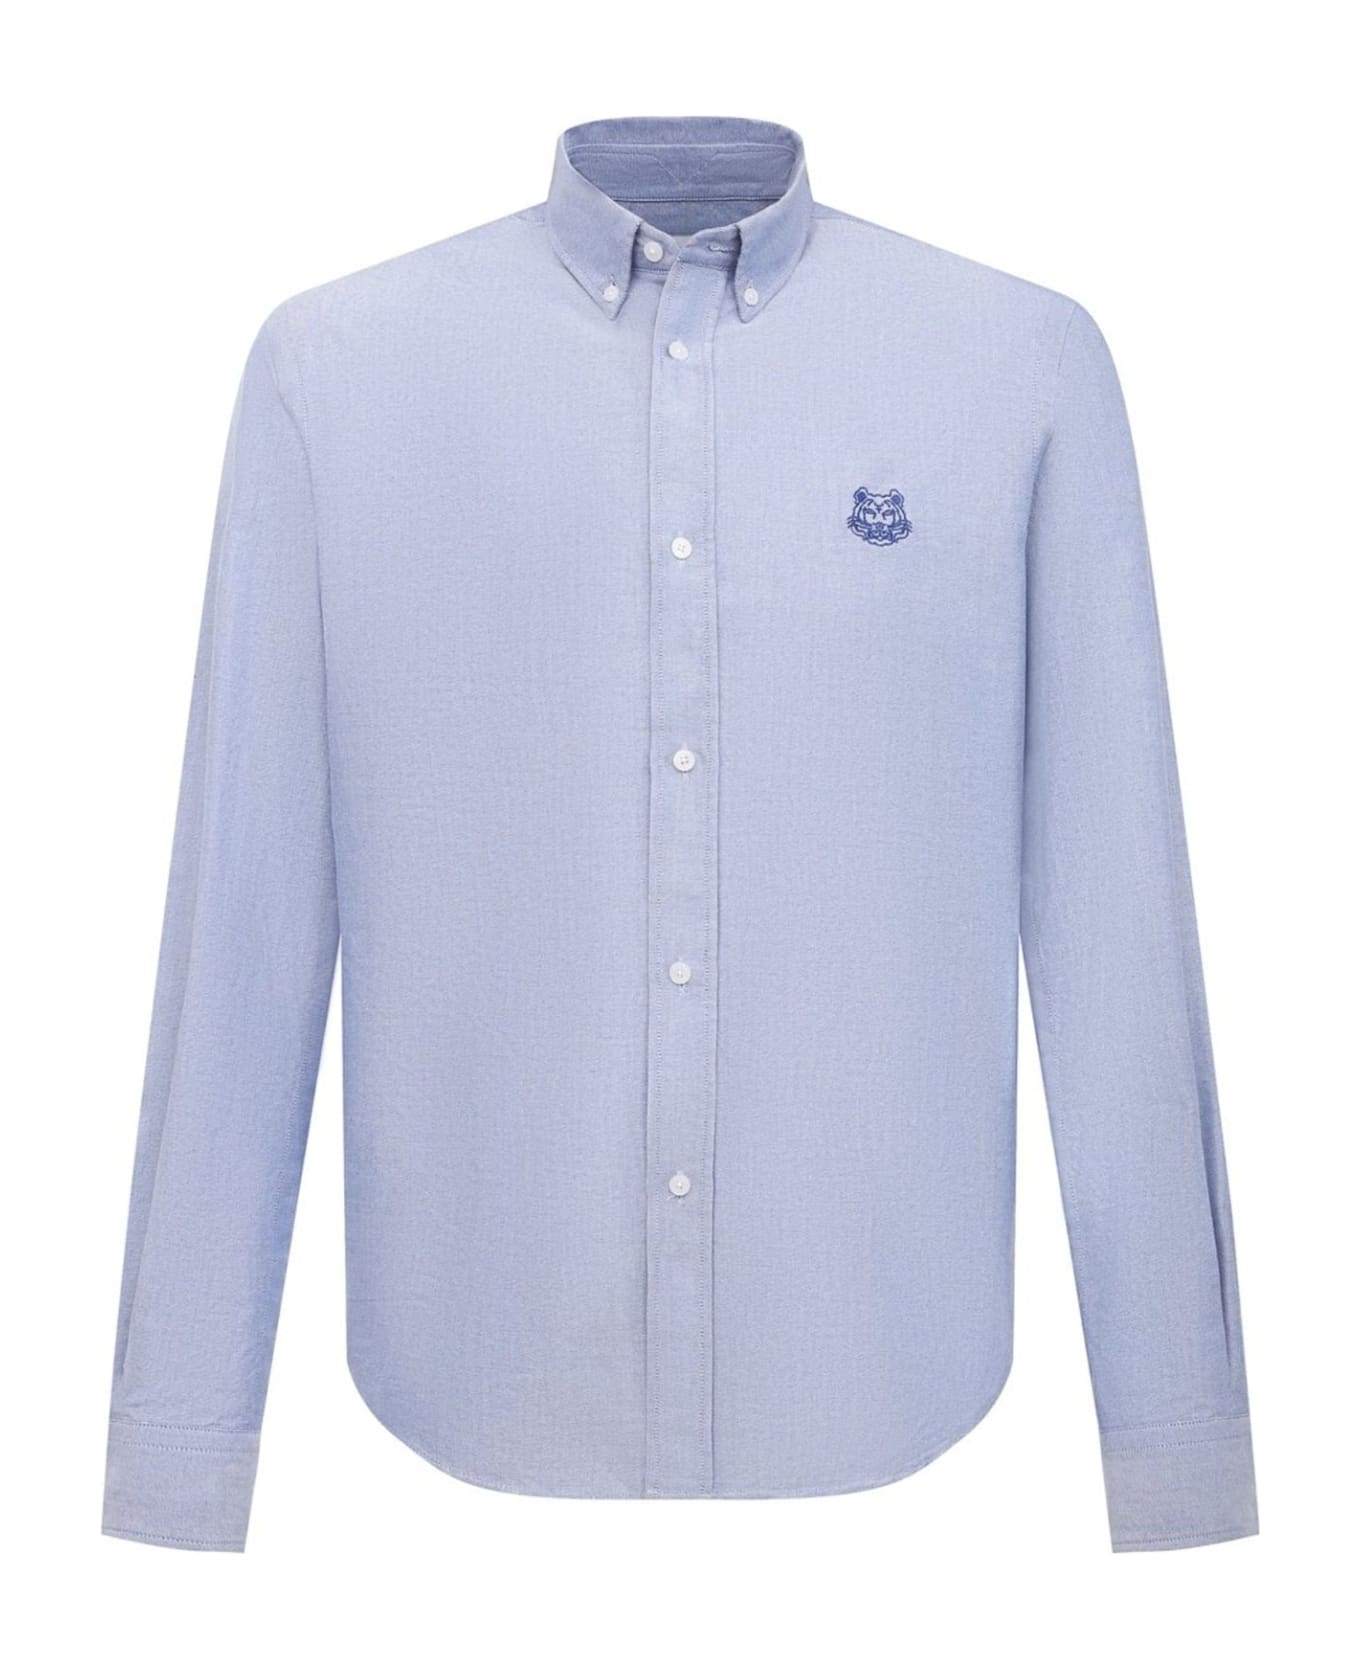 Kenzo Tiger Embroidered Shirt - Blue